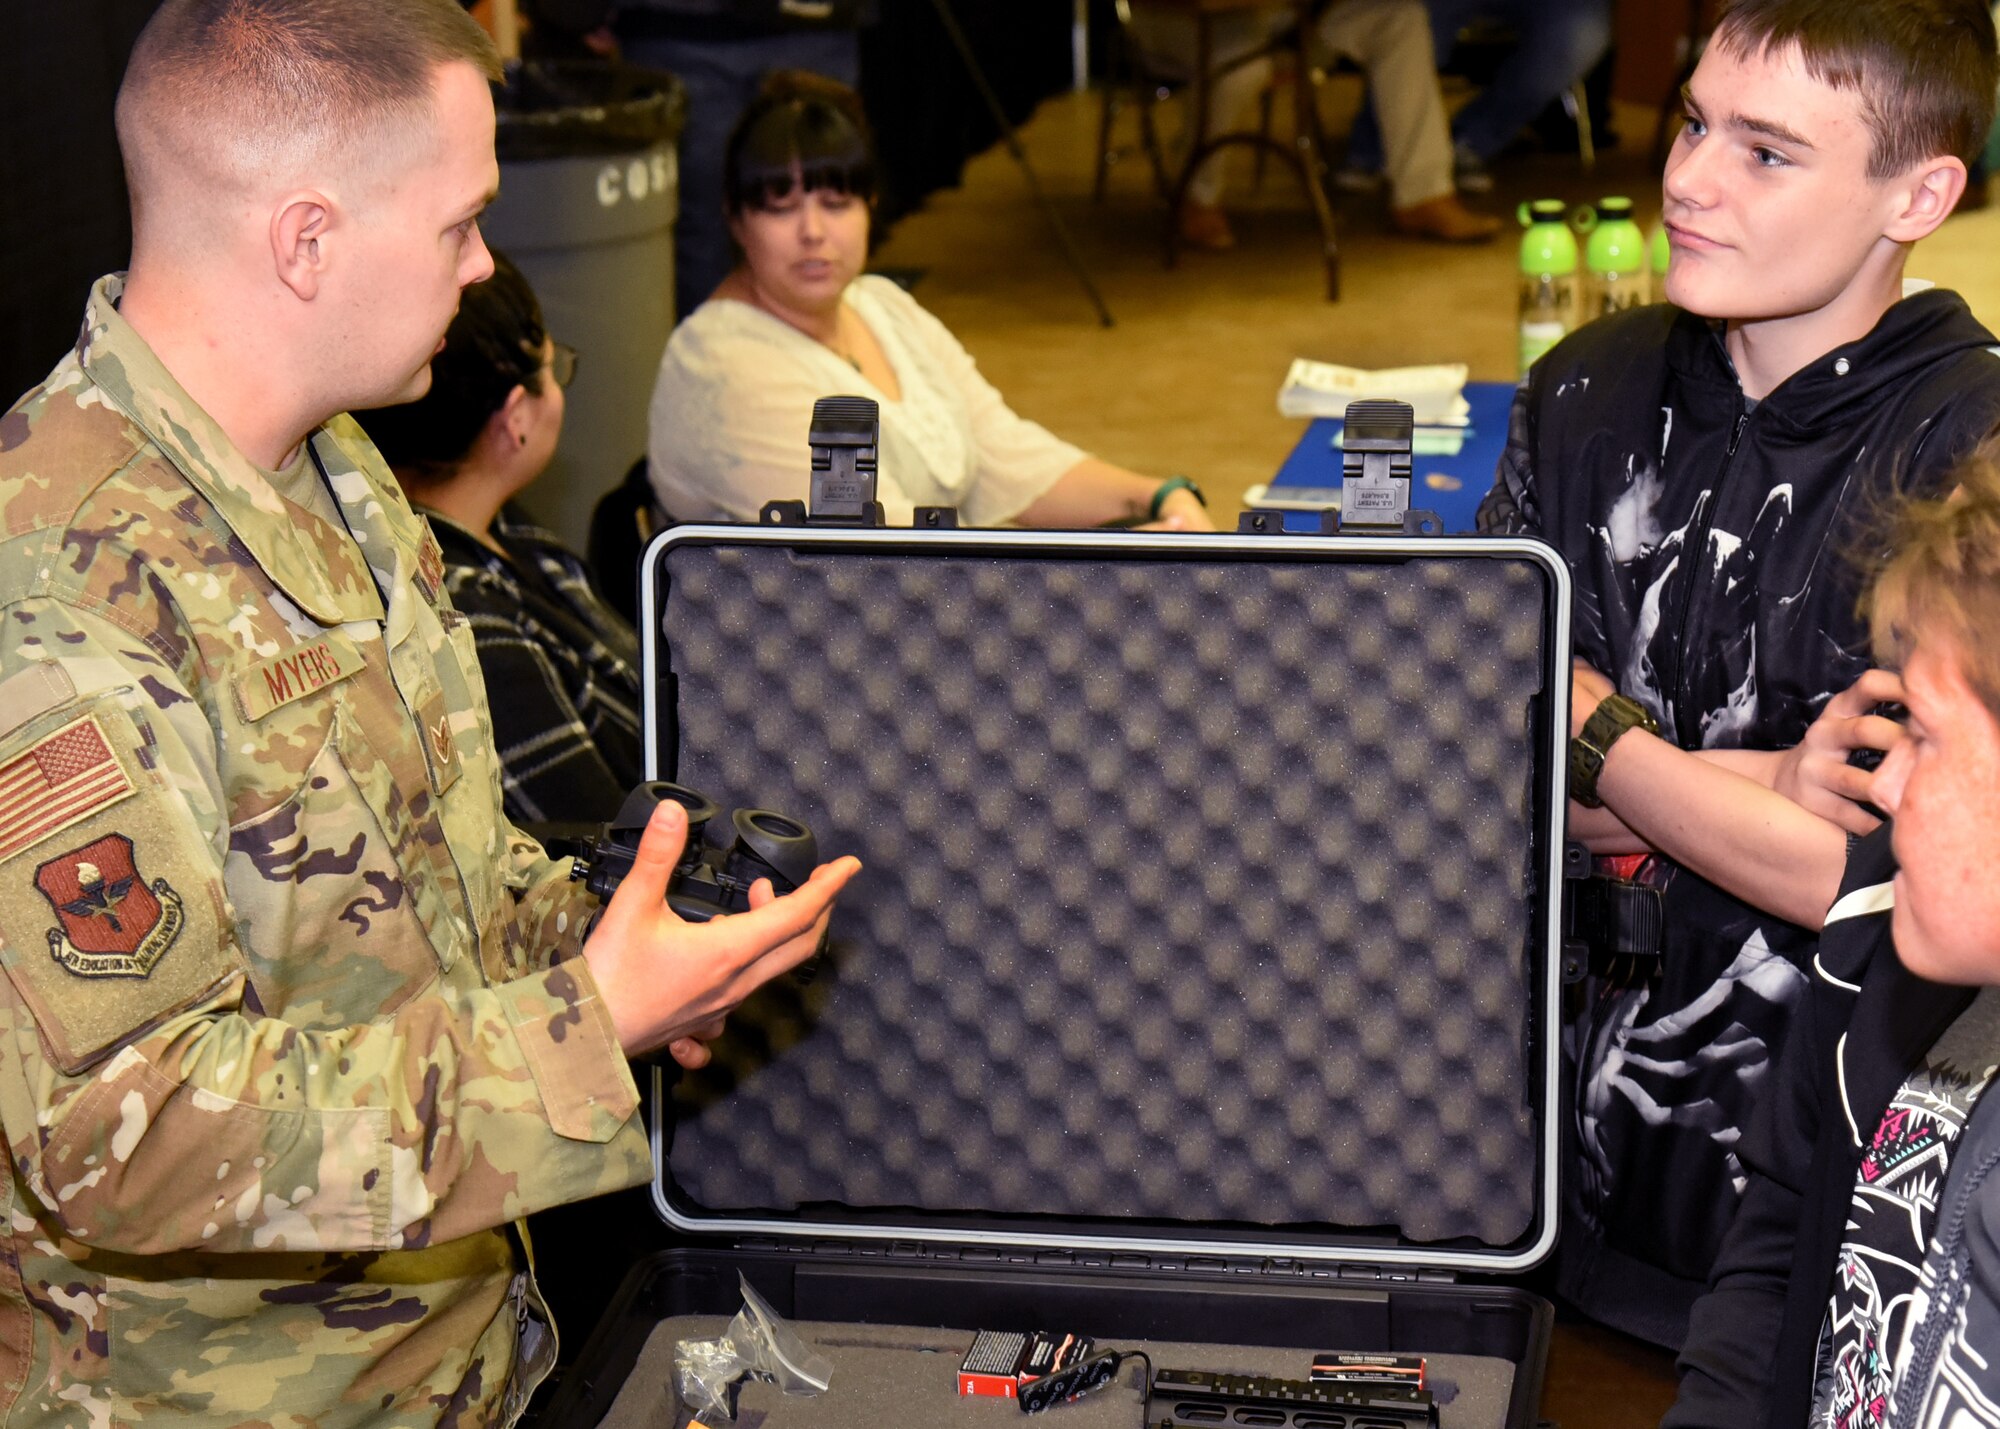 U.S. Air Force Staff Sgt. Benjamin Myers, 315th Training Squadron instructor, converses with students about the functions of night vision goggles, at Careers Y’all, a youth career fair, at the McNease Convention Center, in San Angelo, Texas, March 6, 2019. Night vision goggles use ambient light such as moonlight and starlight to provide vision in low light situations. (U.S. Air Force photo by Airman 1st Class Abbey Rieves/Released)